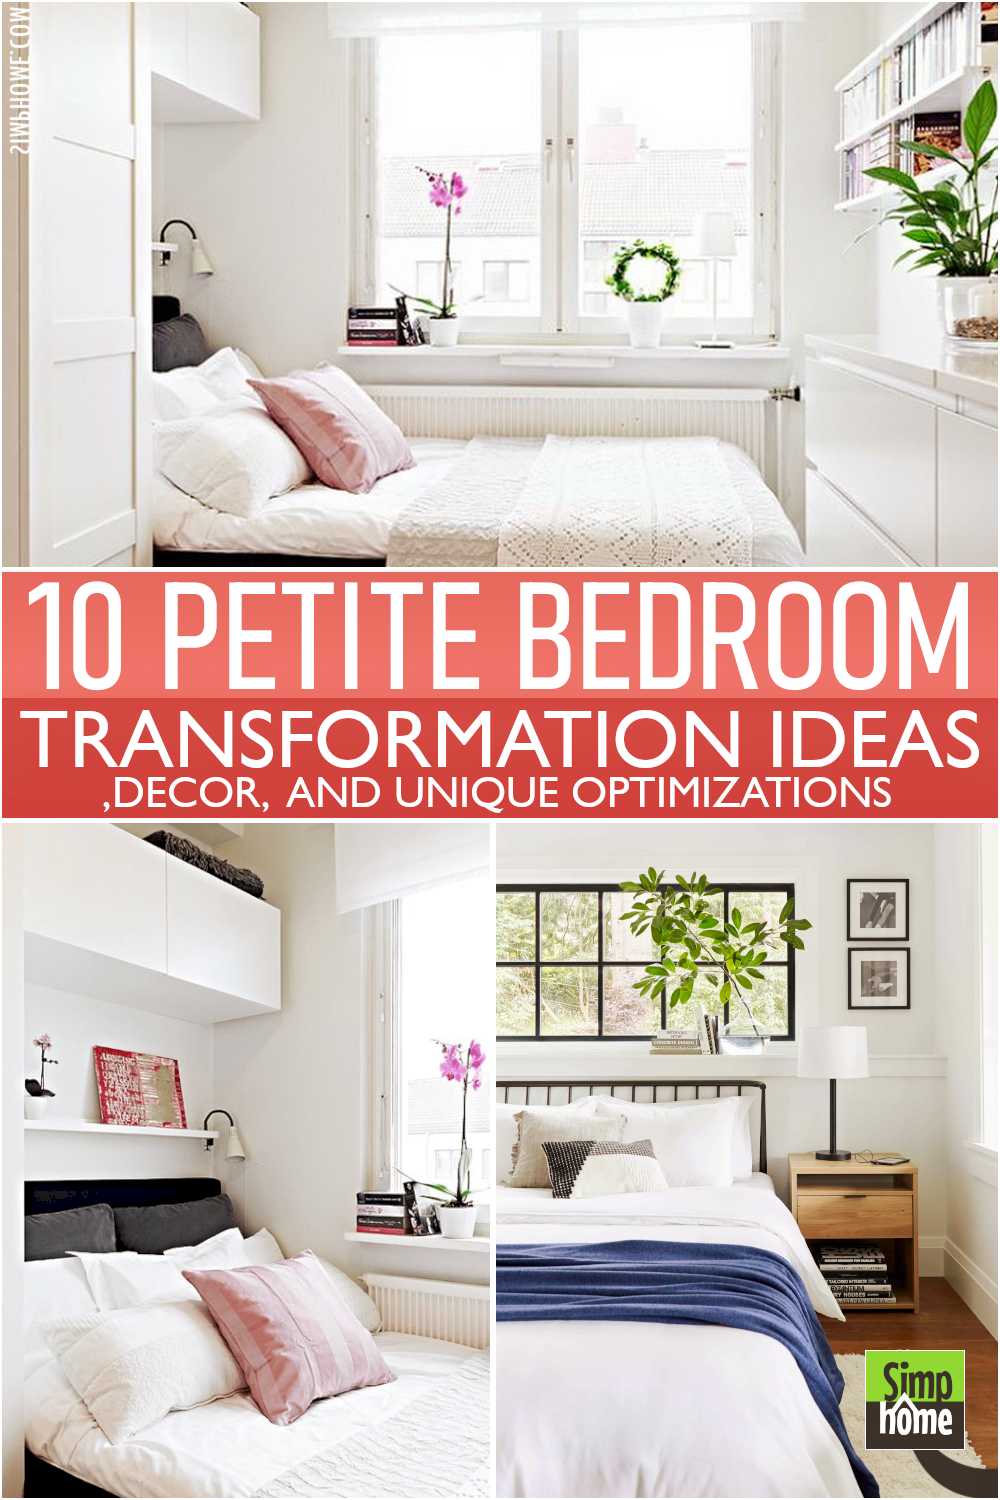 This is 10 Petite Bedroom Transformations Poster